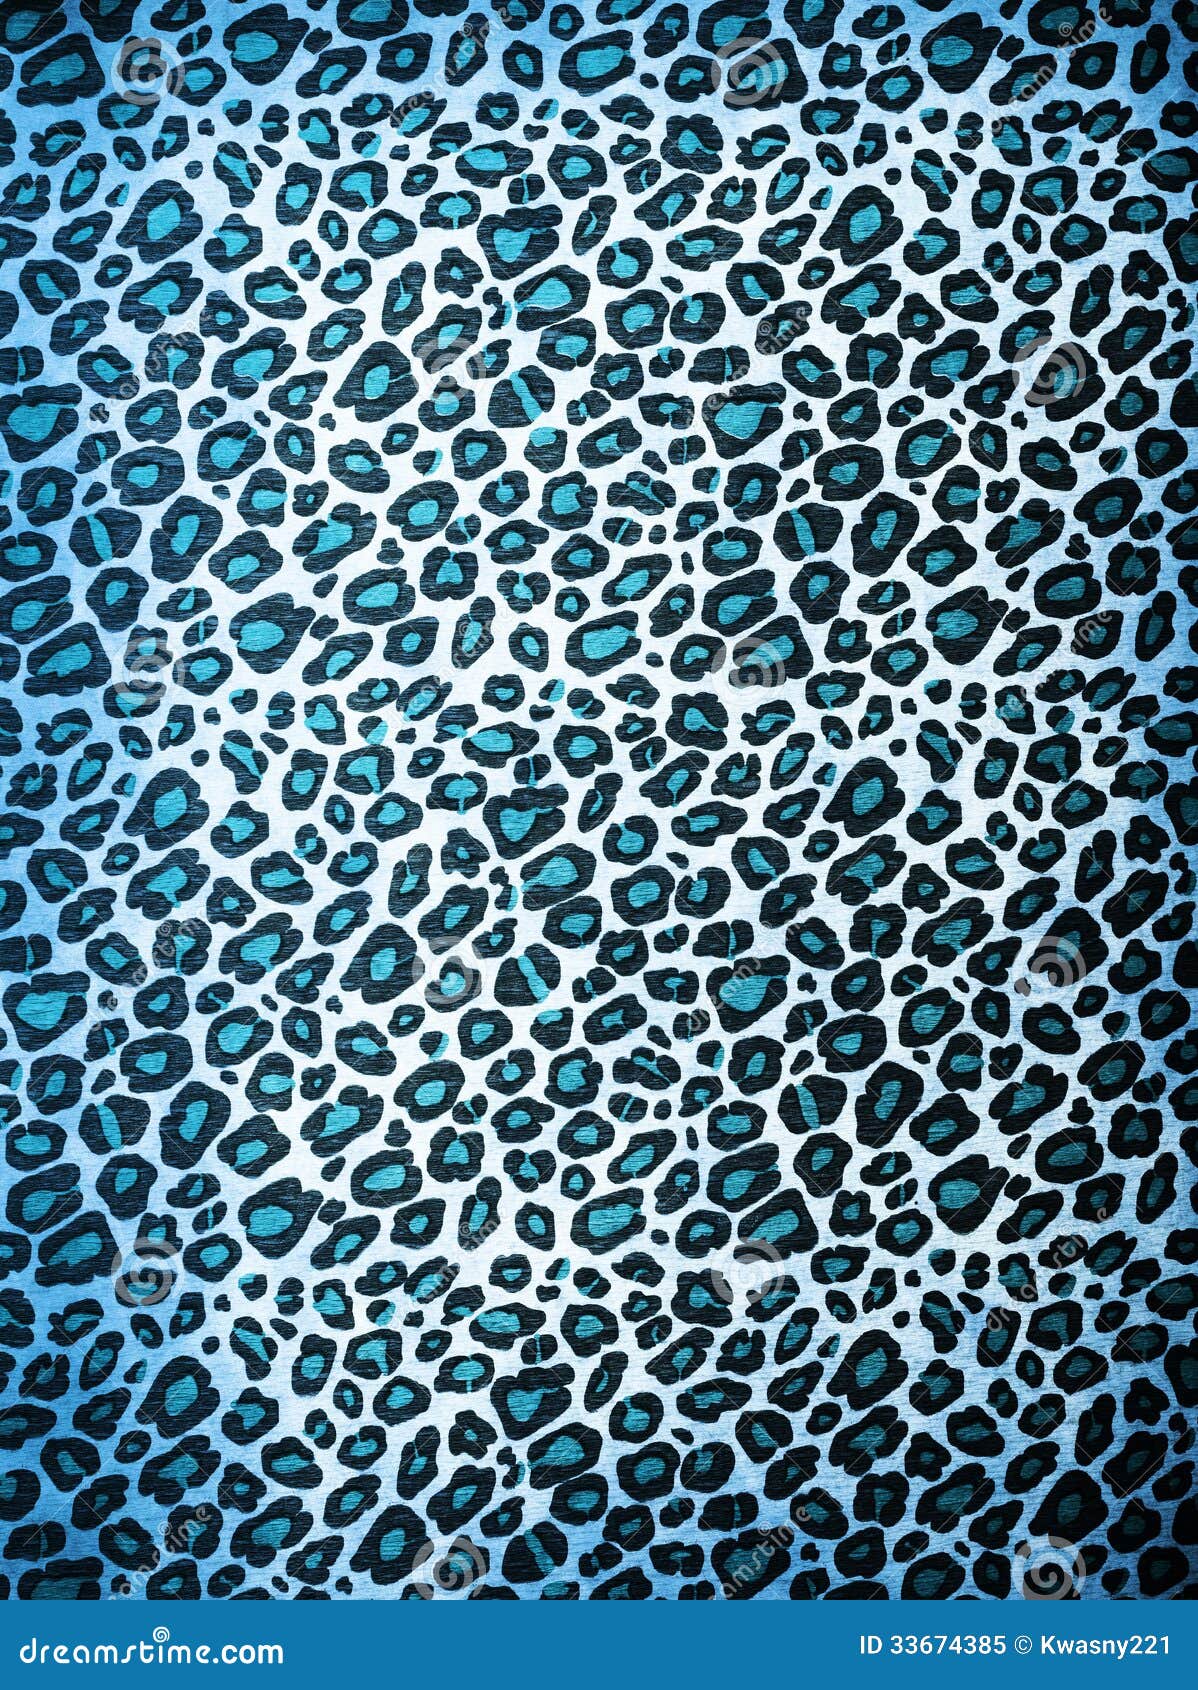 Leopard pattern stock image. Image of brown, puma, panther - 33674385